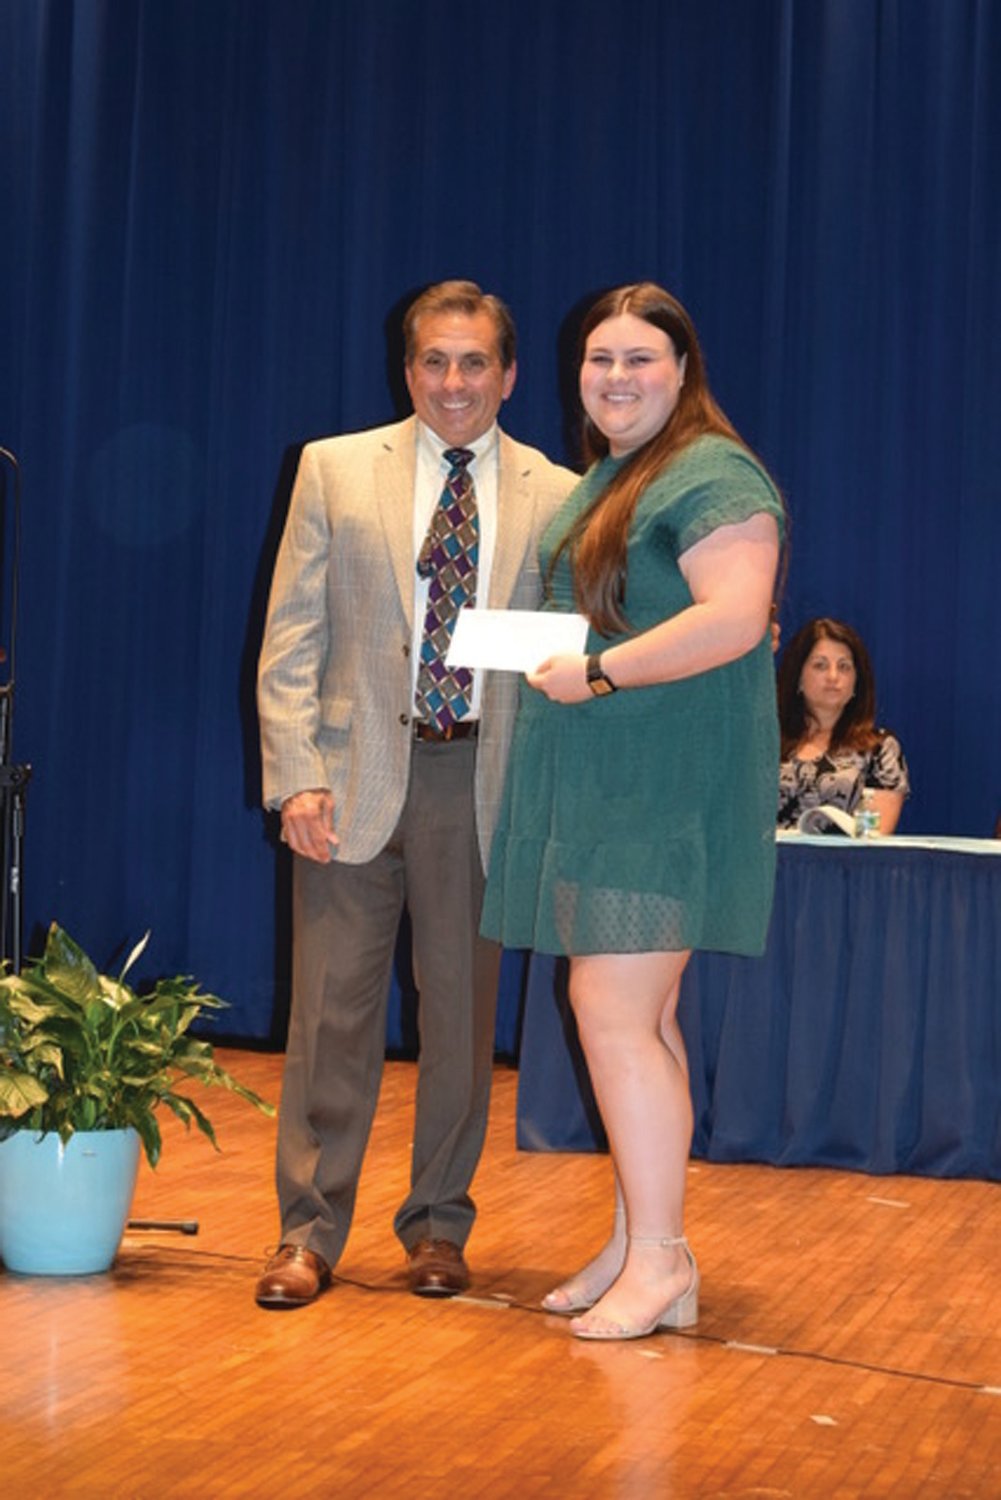 PRESIDENT’S AWARD: Greg Russo, who chairs the JHS Science Department and serves as Student Council and SADD Advisor, is all smiles while presenting the Student Council President’s Award to Rebecca Clements.